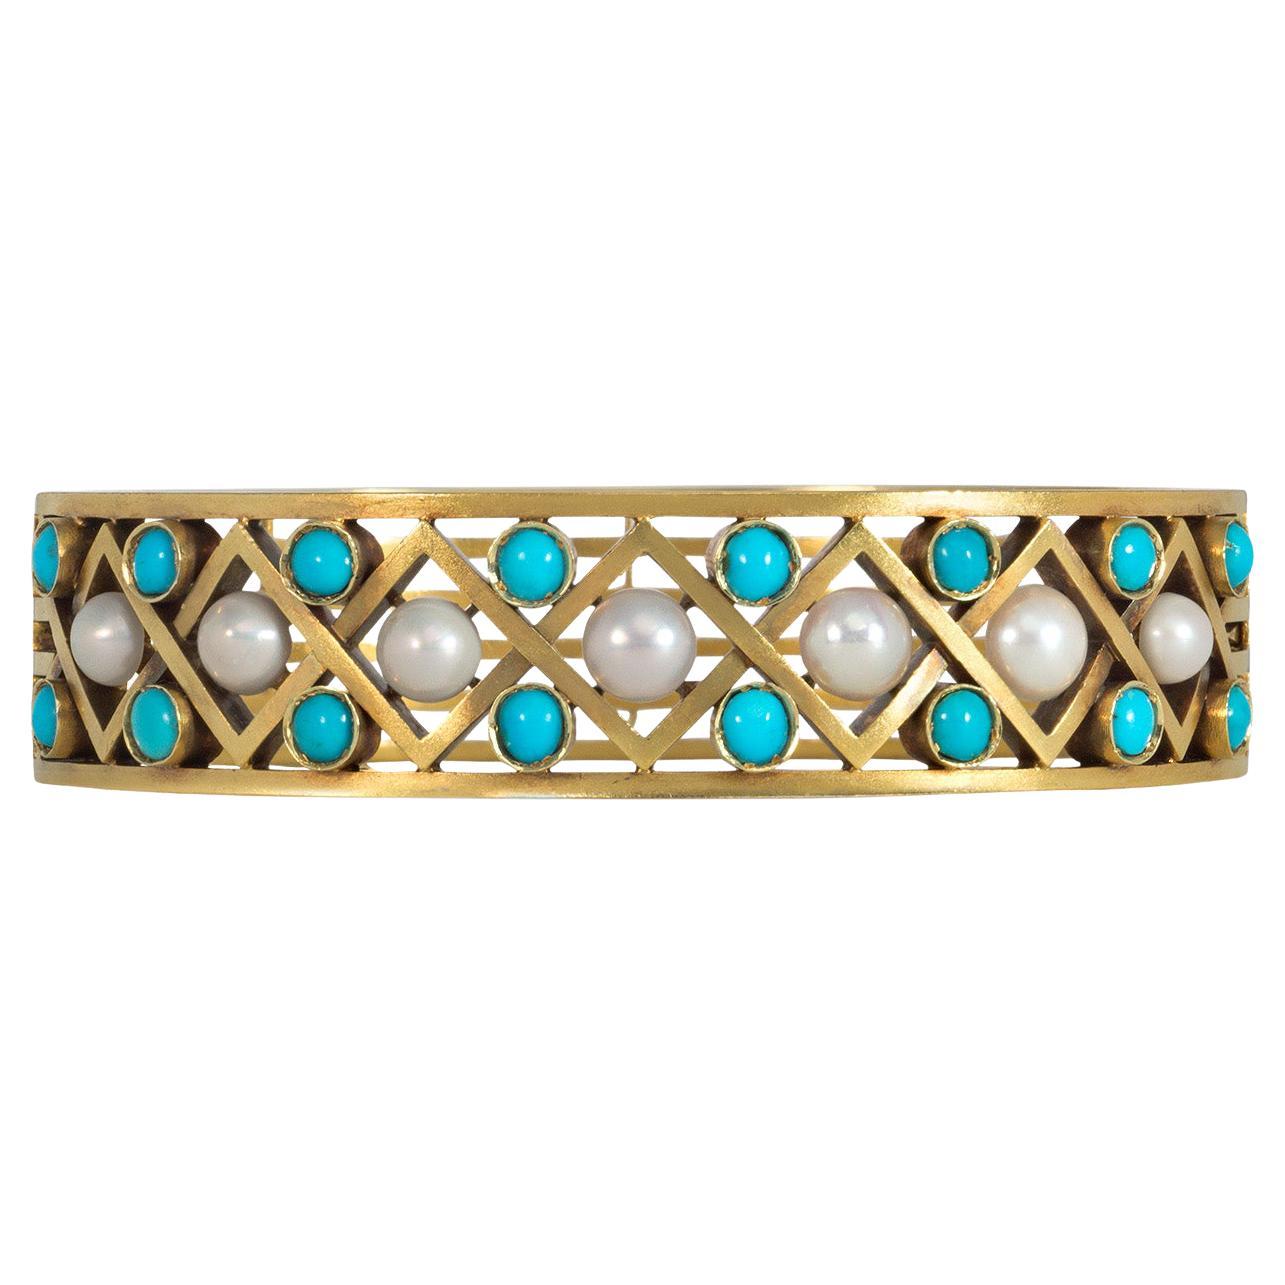 Antique Gold, Turquoise, and Pearl Openwork Bangle Bracelet with Lattice Design